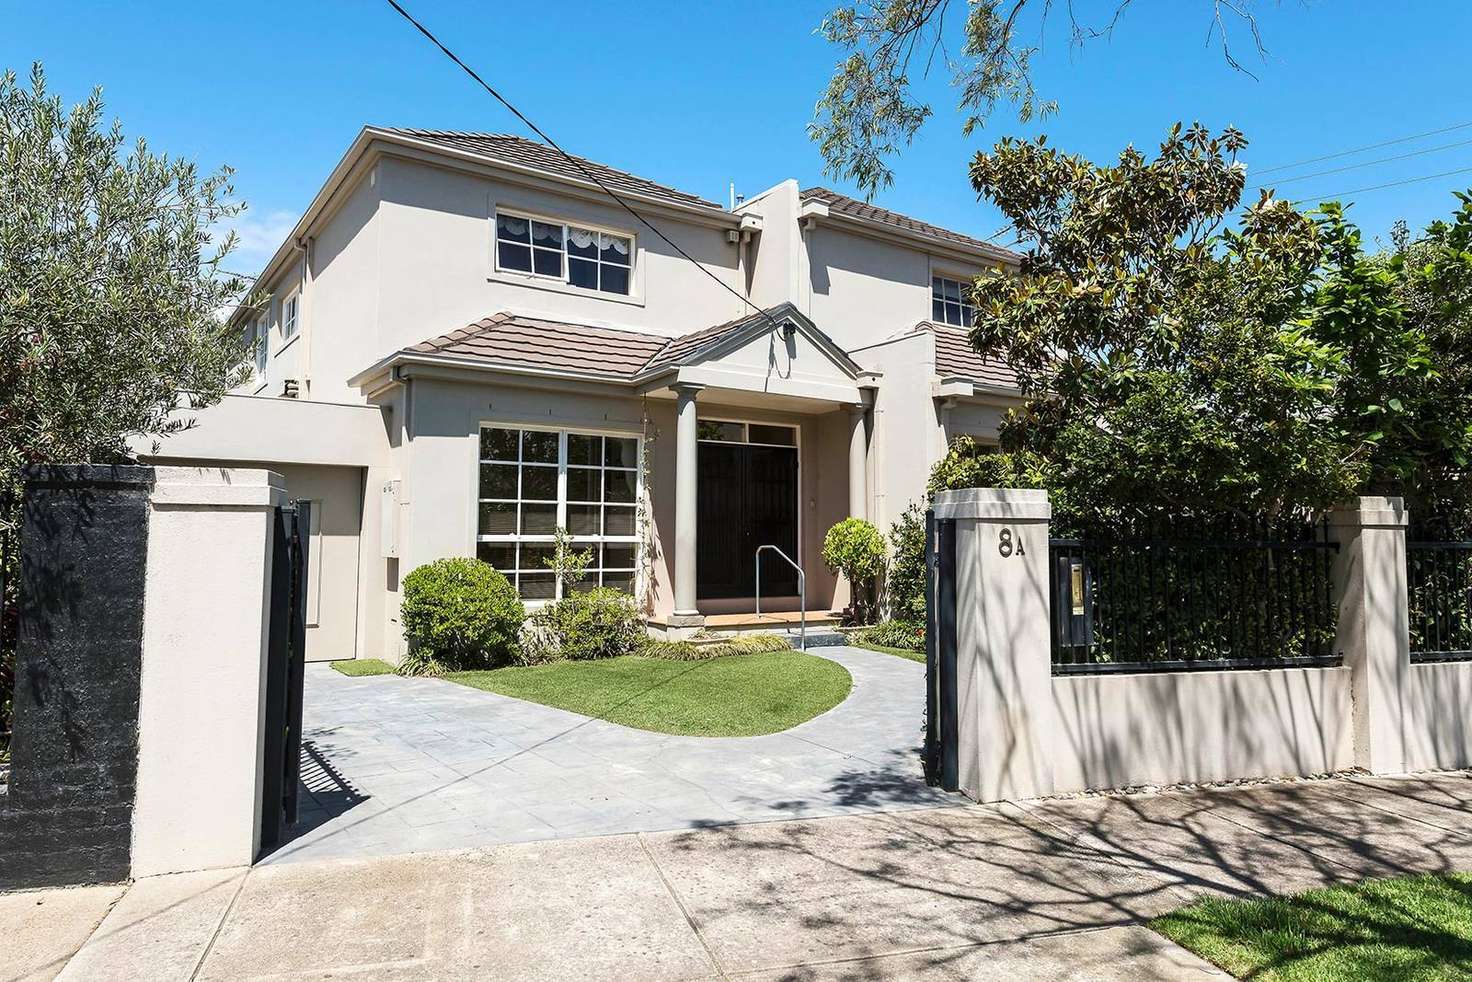 Main view of Homely house listing, 8A Garden Avenue, Brighton East VIC 3187